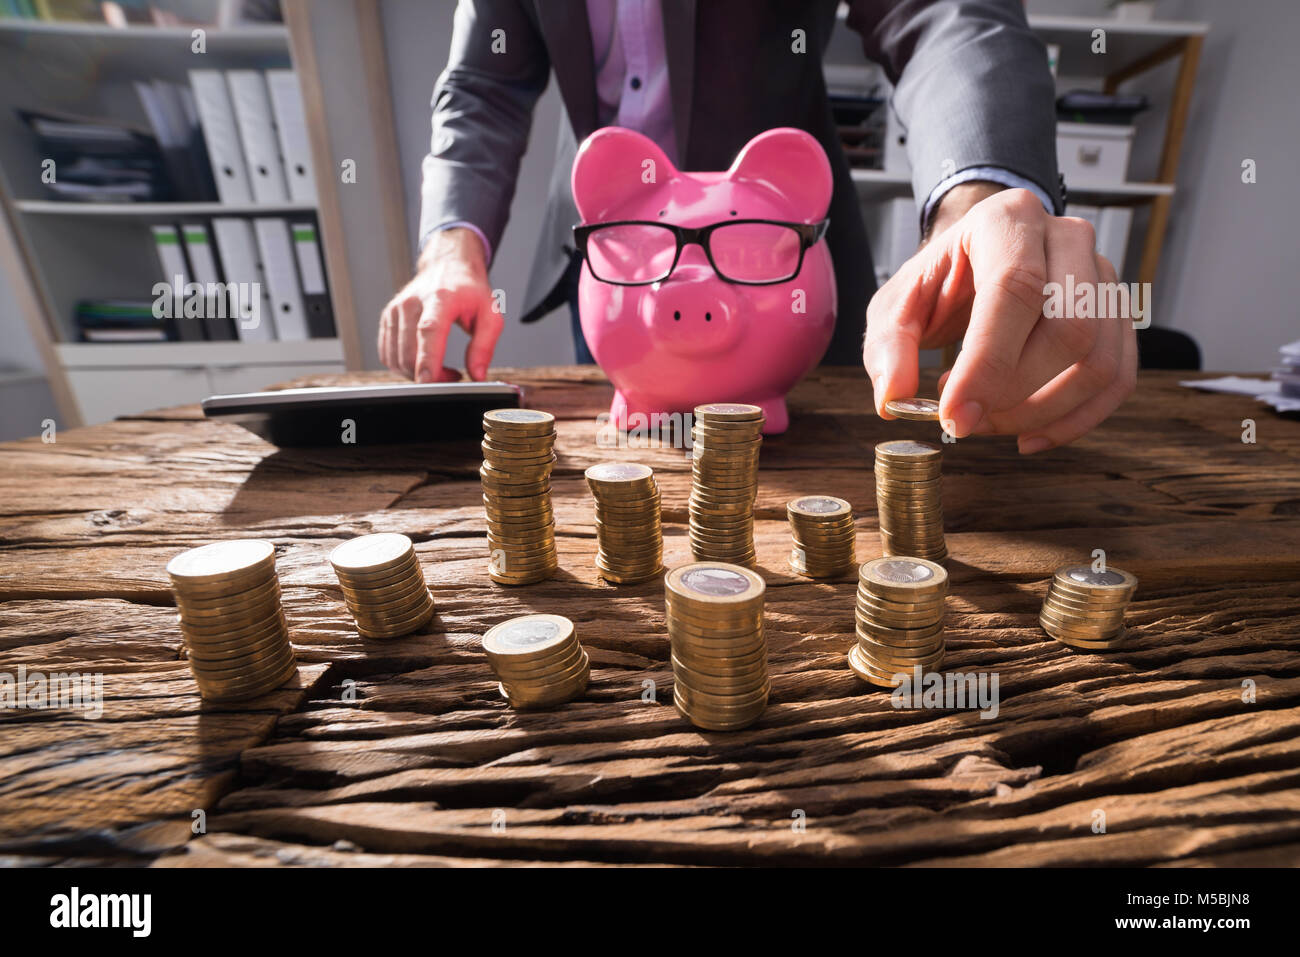 Businessperson Calculating Stacked Golden Coins With Pink Piggybank On Wooden Desk Stock Photo